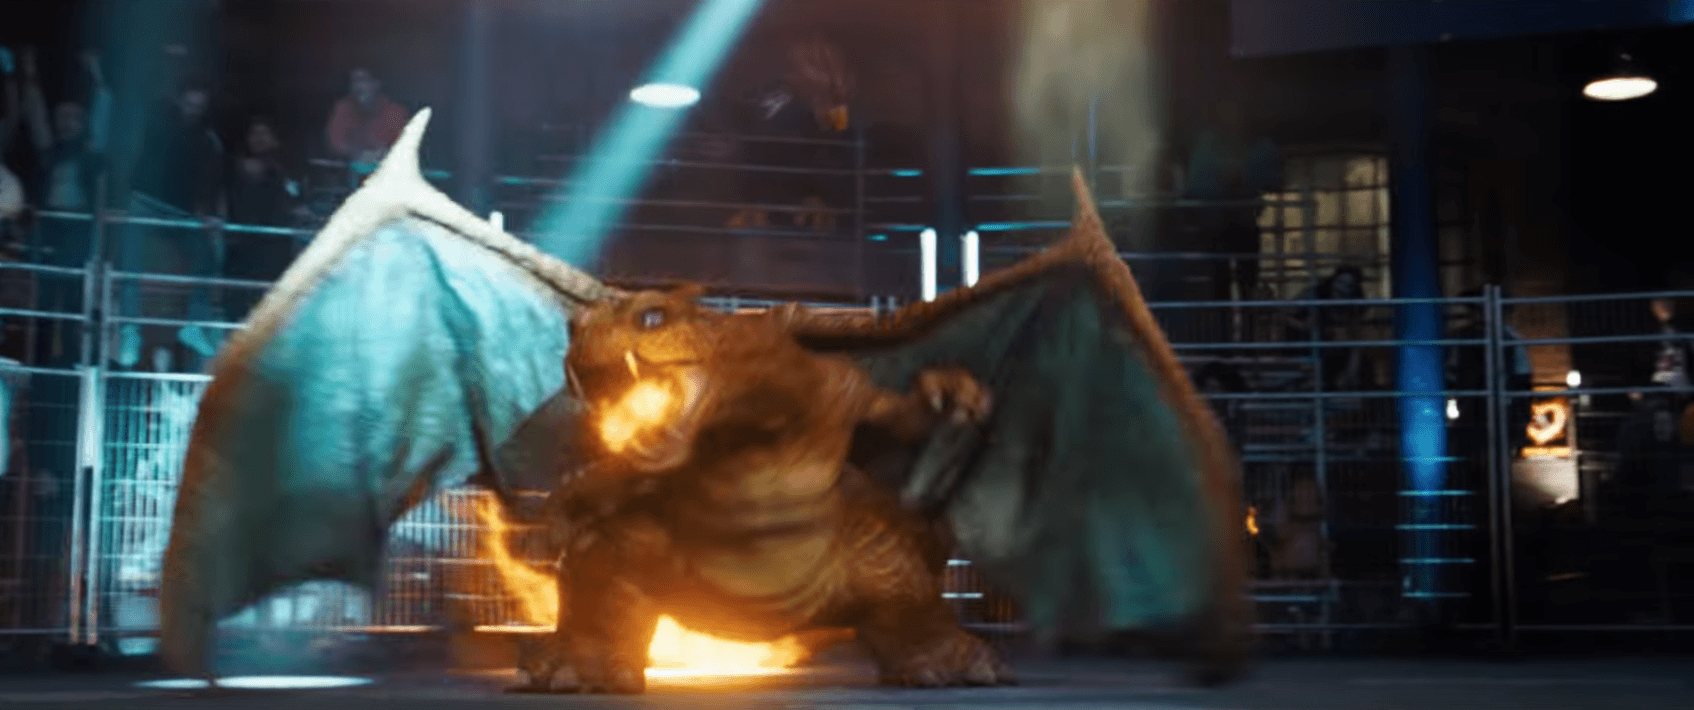 Every Pokémon We Spotted in the DETECTIVE PIKACHU